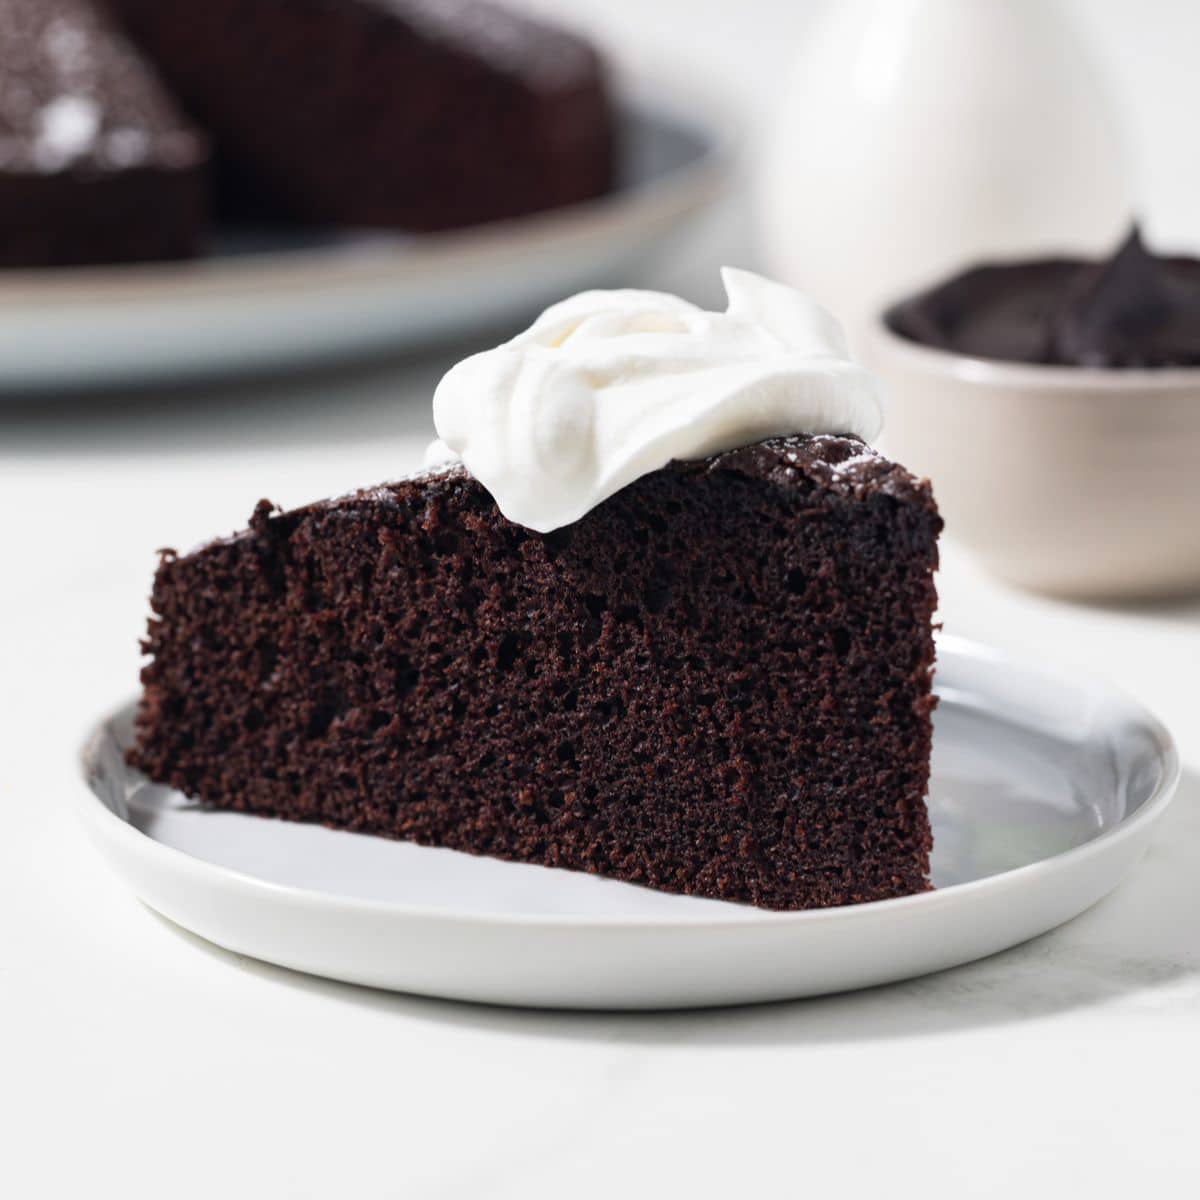 Slice of chocolate olive oil cake with whipped cream on top.